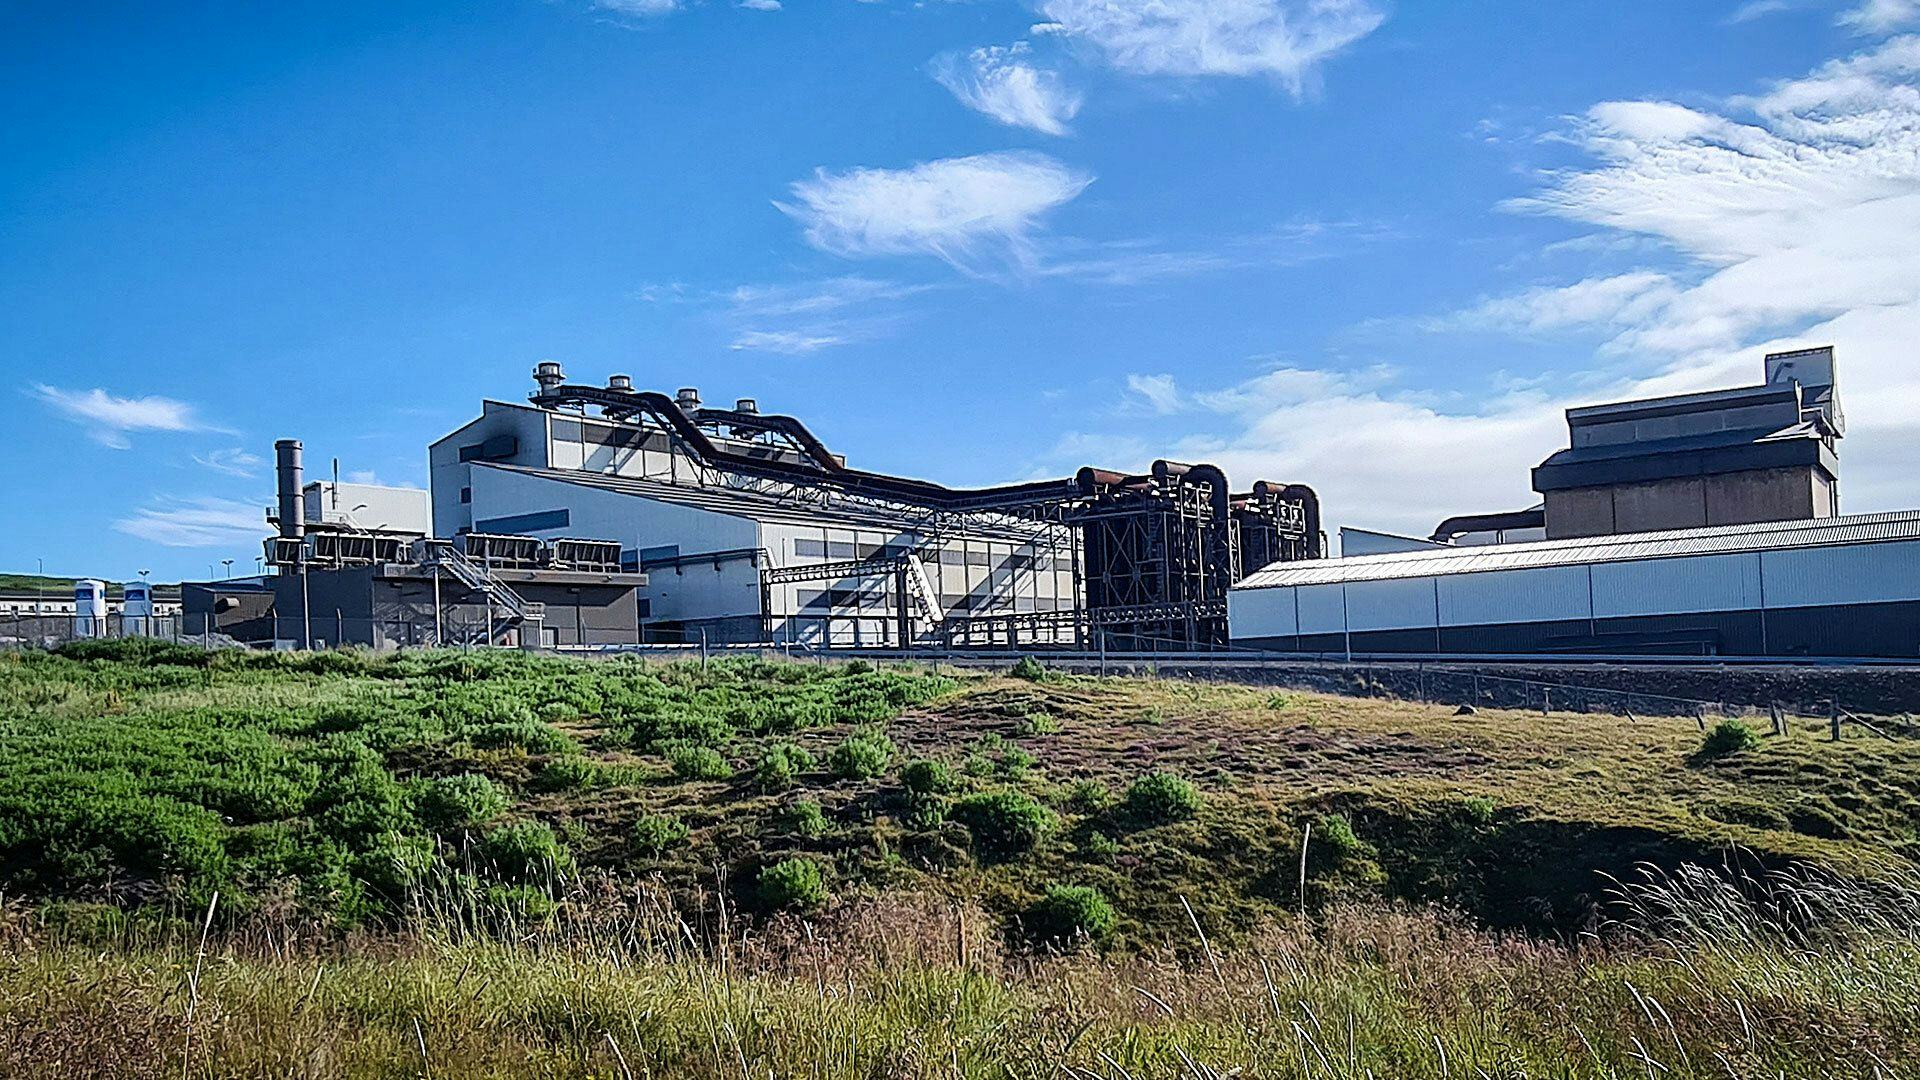 The image shows an industrial facility with large plant and processing facility set against a clear sky with some cloud cover